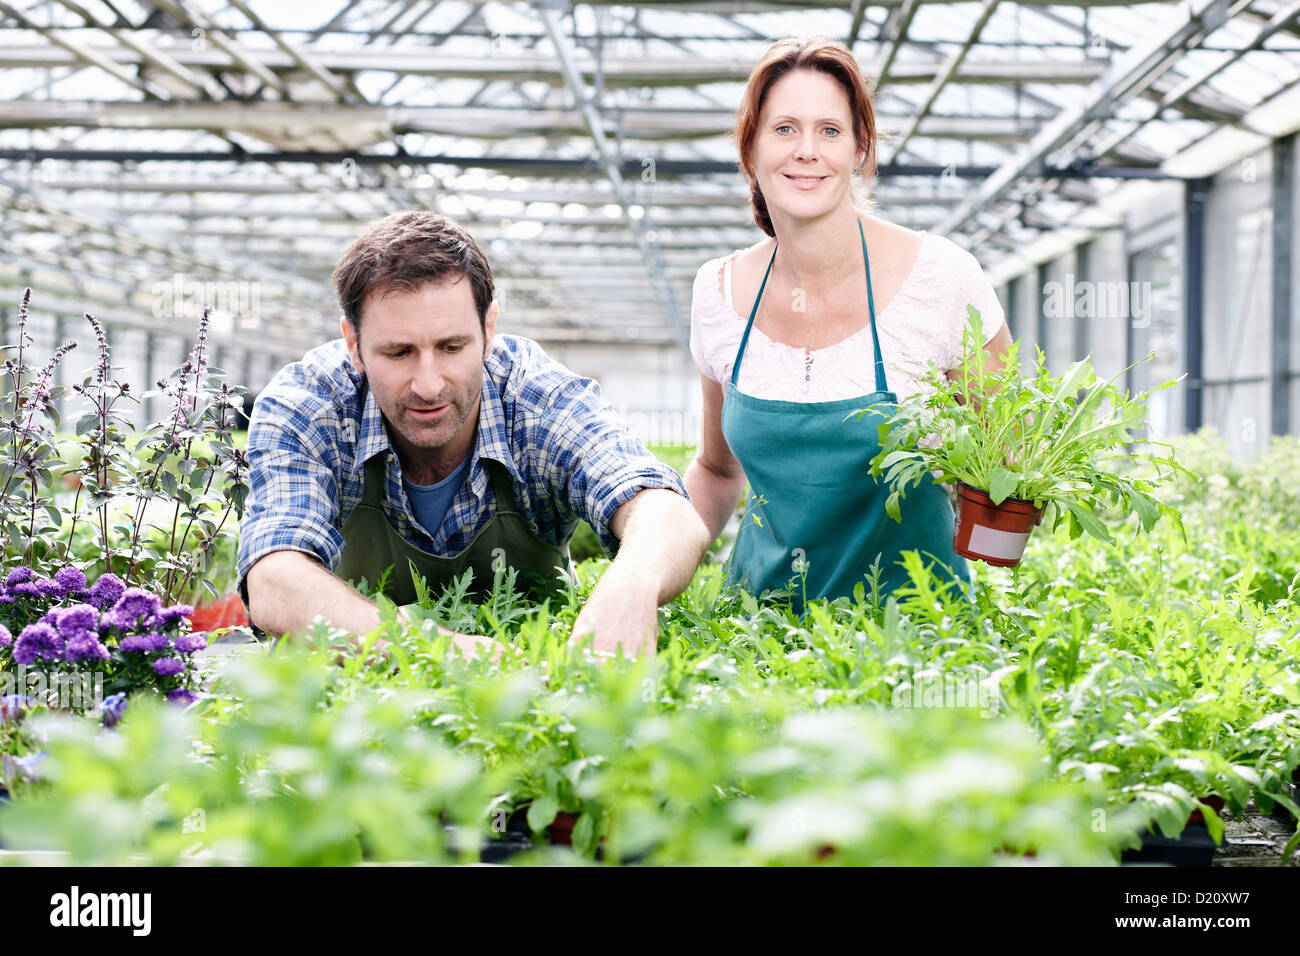 Germany, Bavaria, Munich, Mature man and woman standing with rocket plant in greenhouse Stock Photo